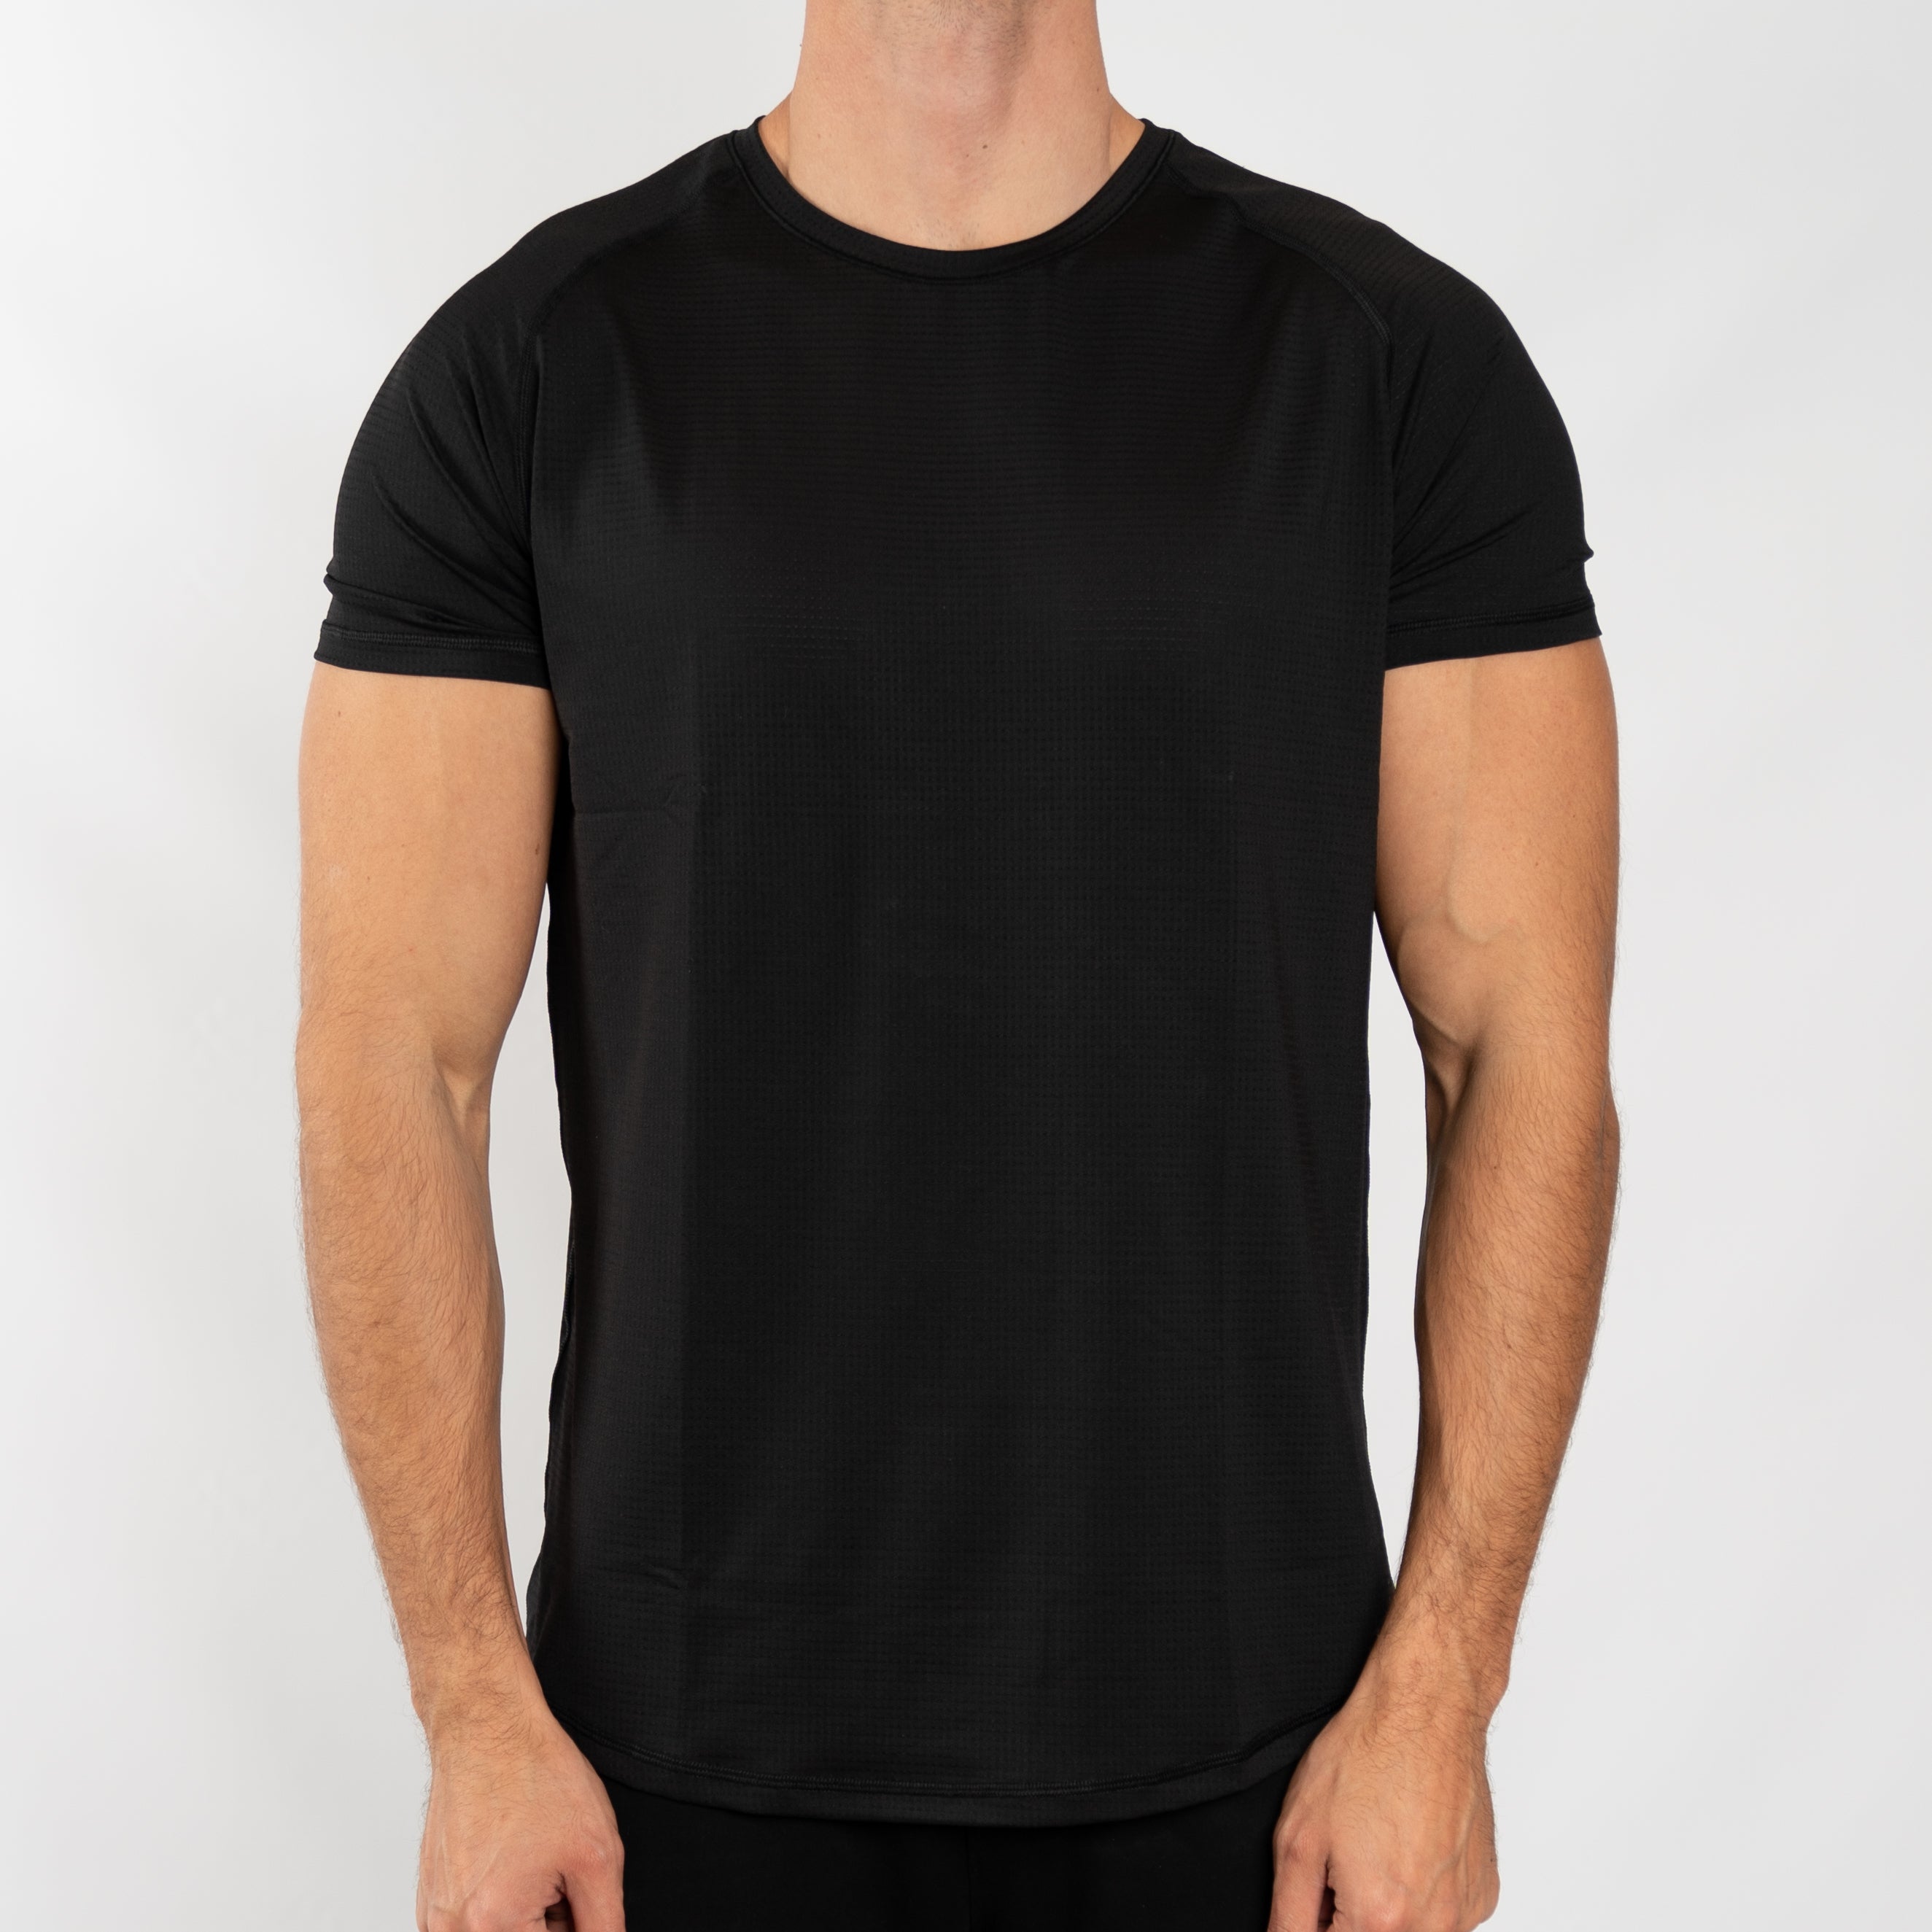 Men's Performance Tee in Black - Southern Athletica